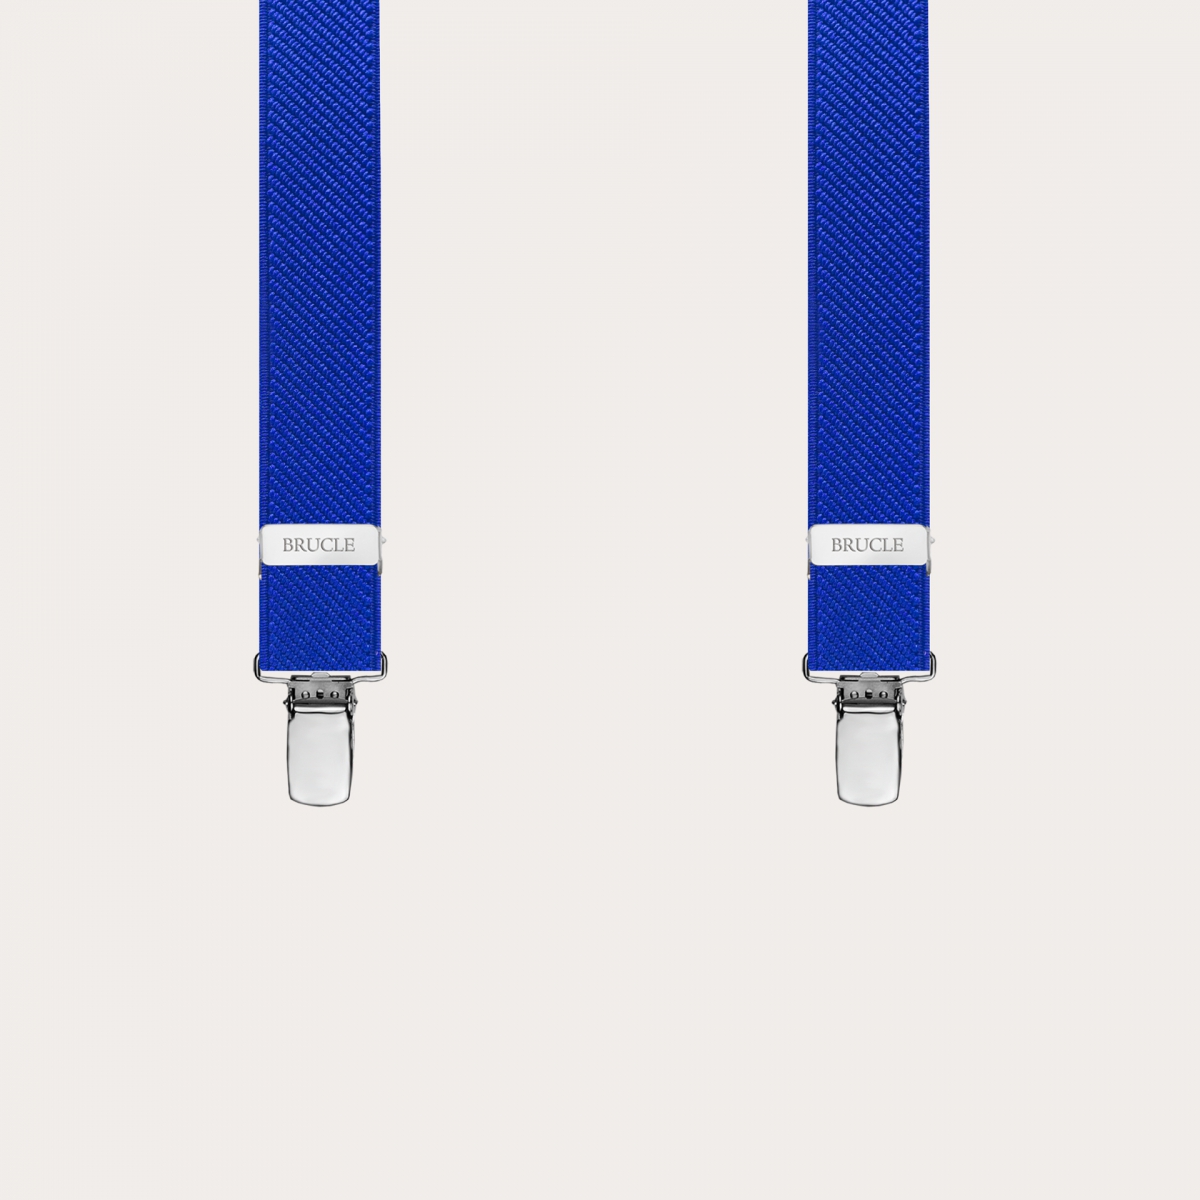 BRUCLE Unisex Y-shaped thin suspenders, royal blue